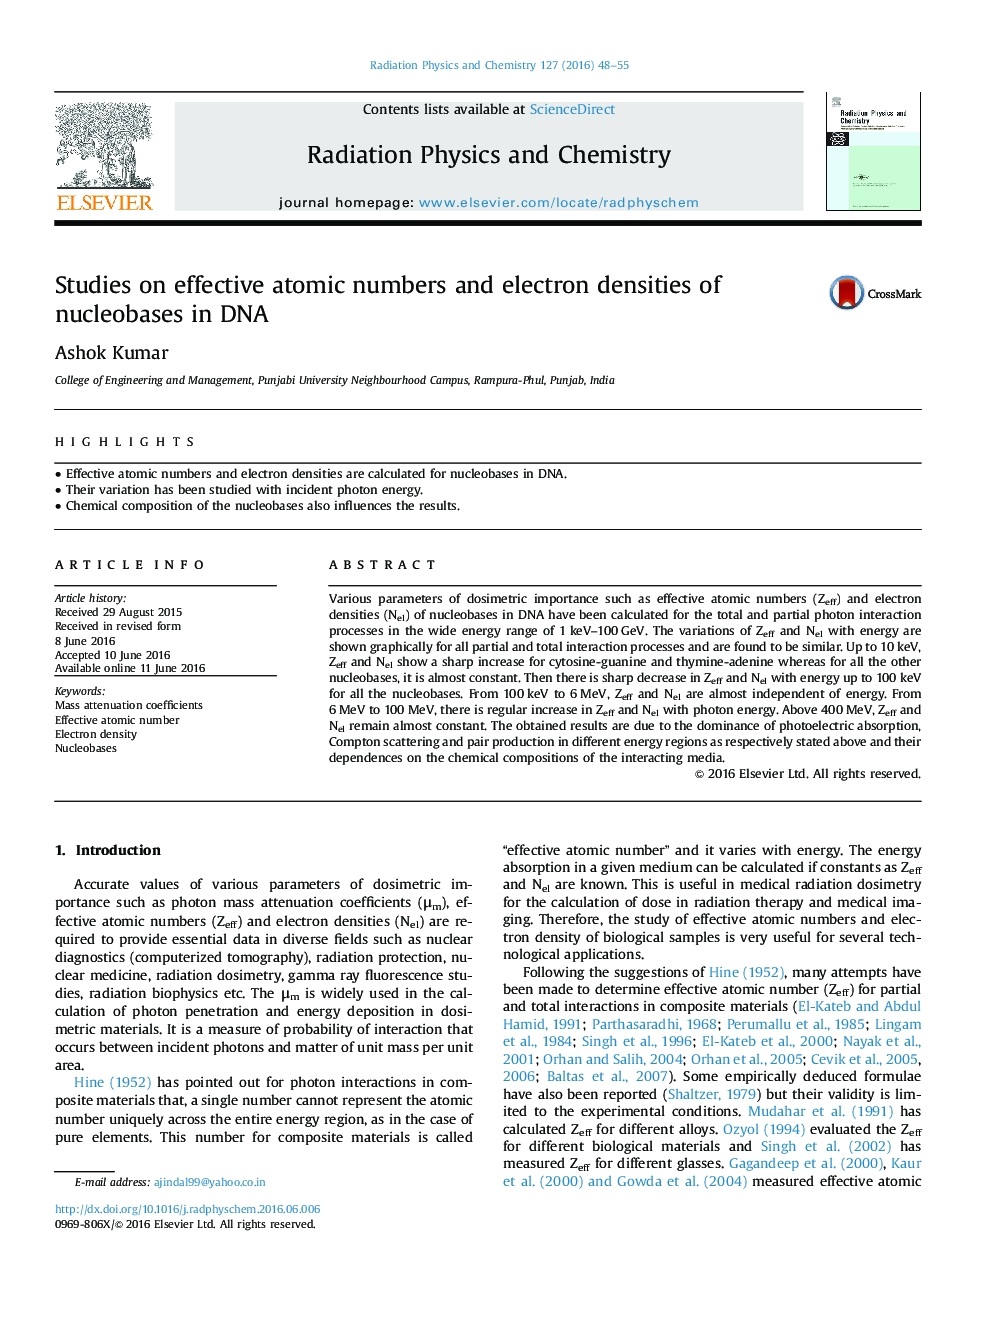 Studies on effective atomic numbers and electron densities of nucleobases in DNA